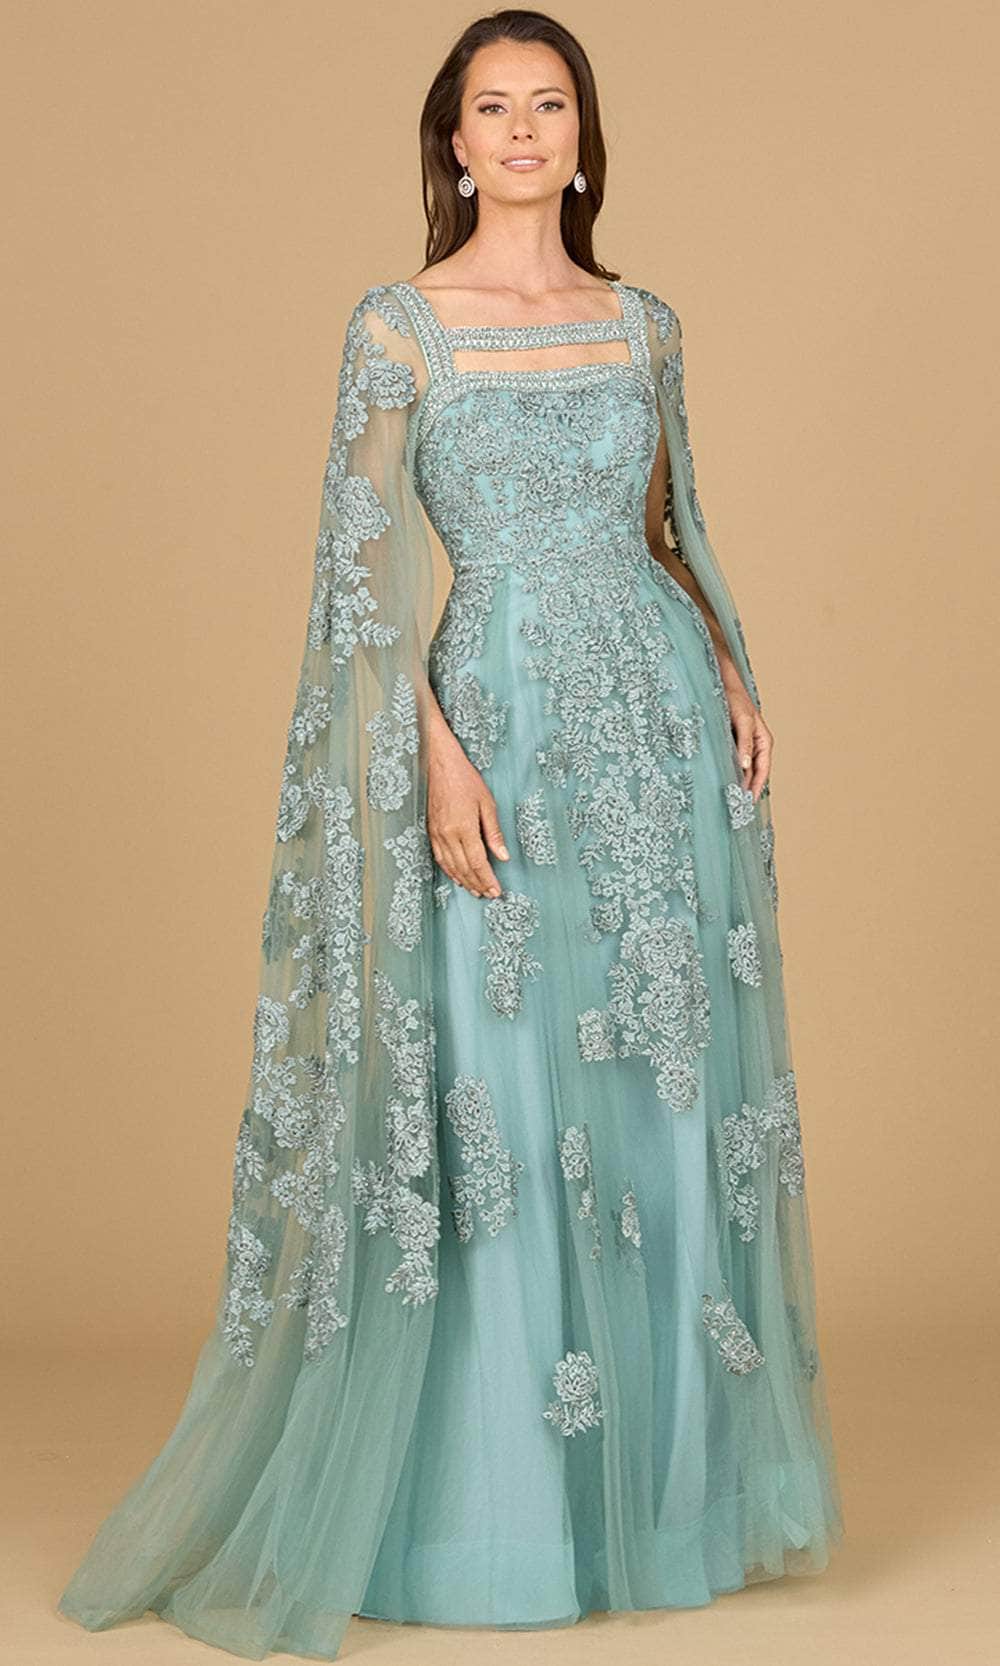 Image of Lara Dresses 29138 - Cape Sleeve Embroidered Evening Gown